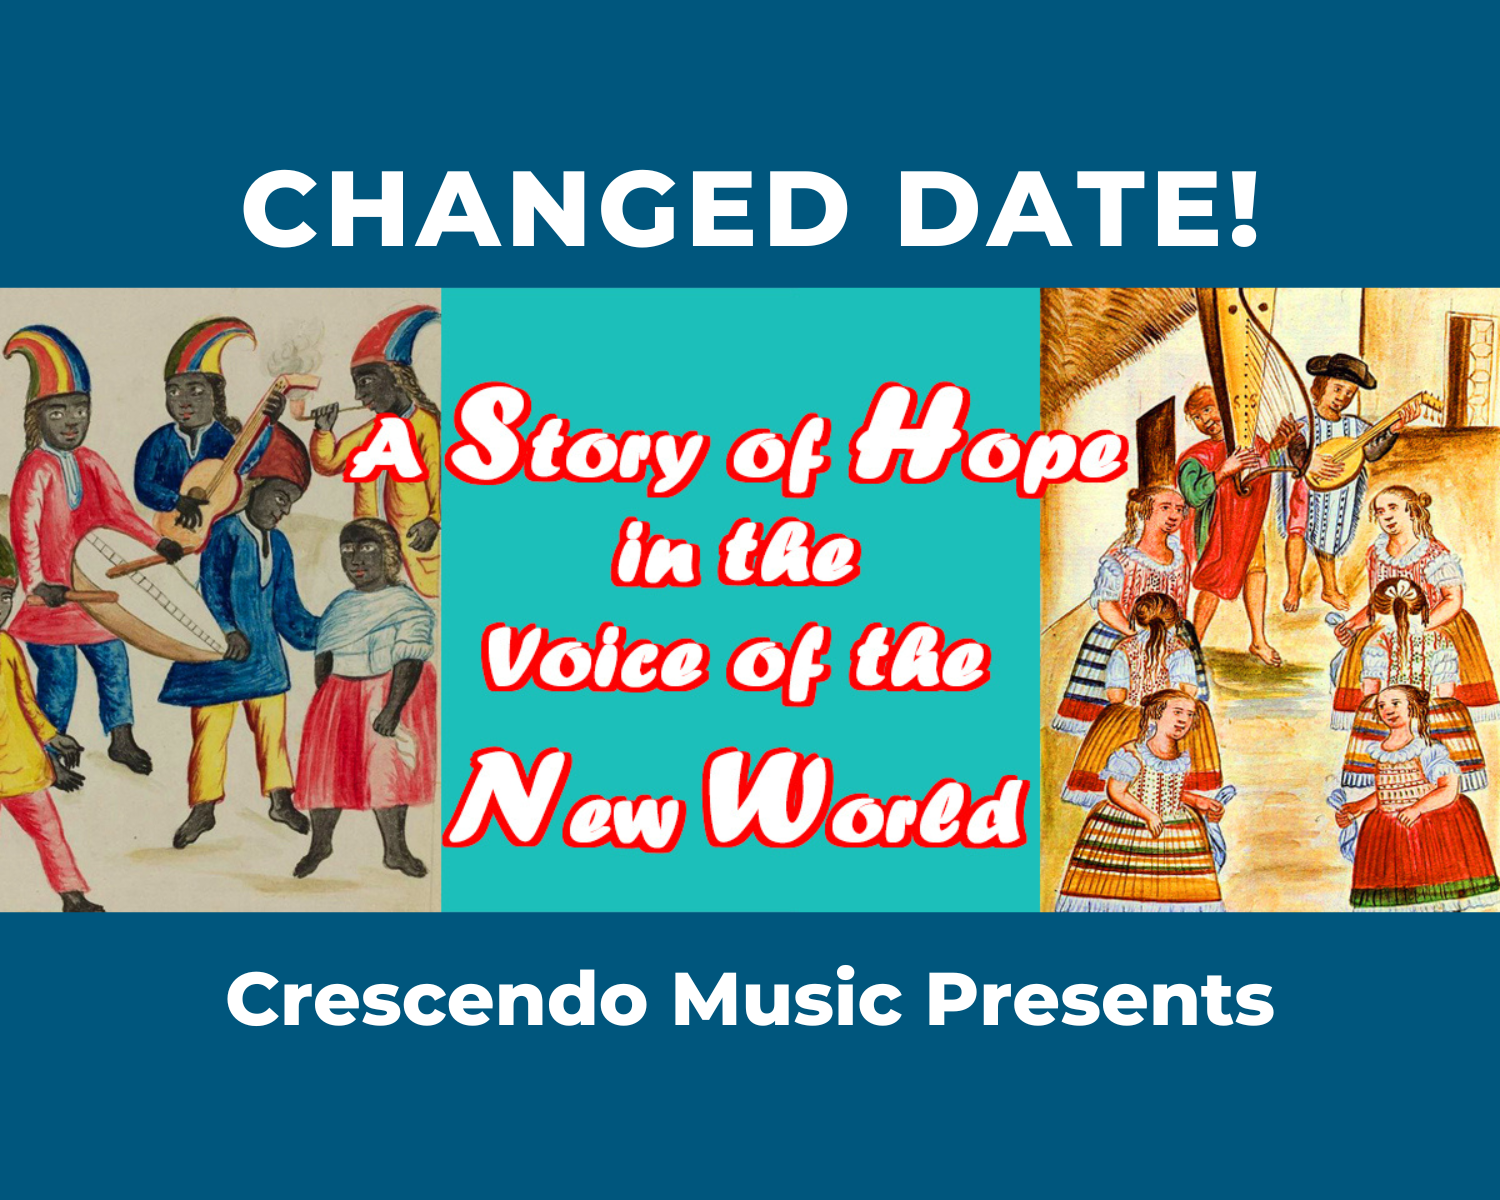 DATE CHANGE! Crescendo Music: A Story of Hope in the Voice of the New World